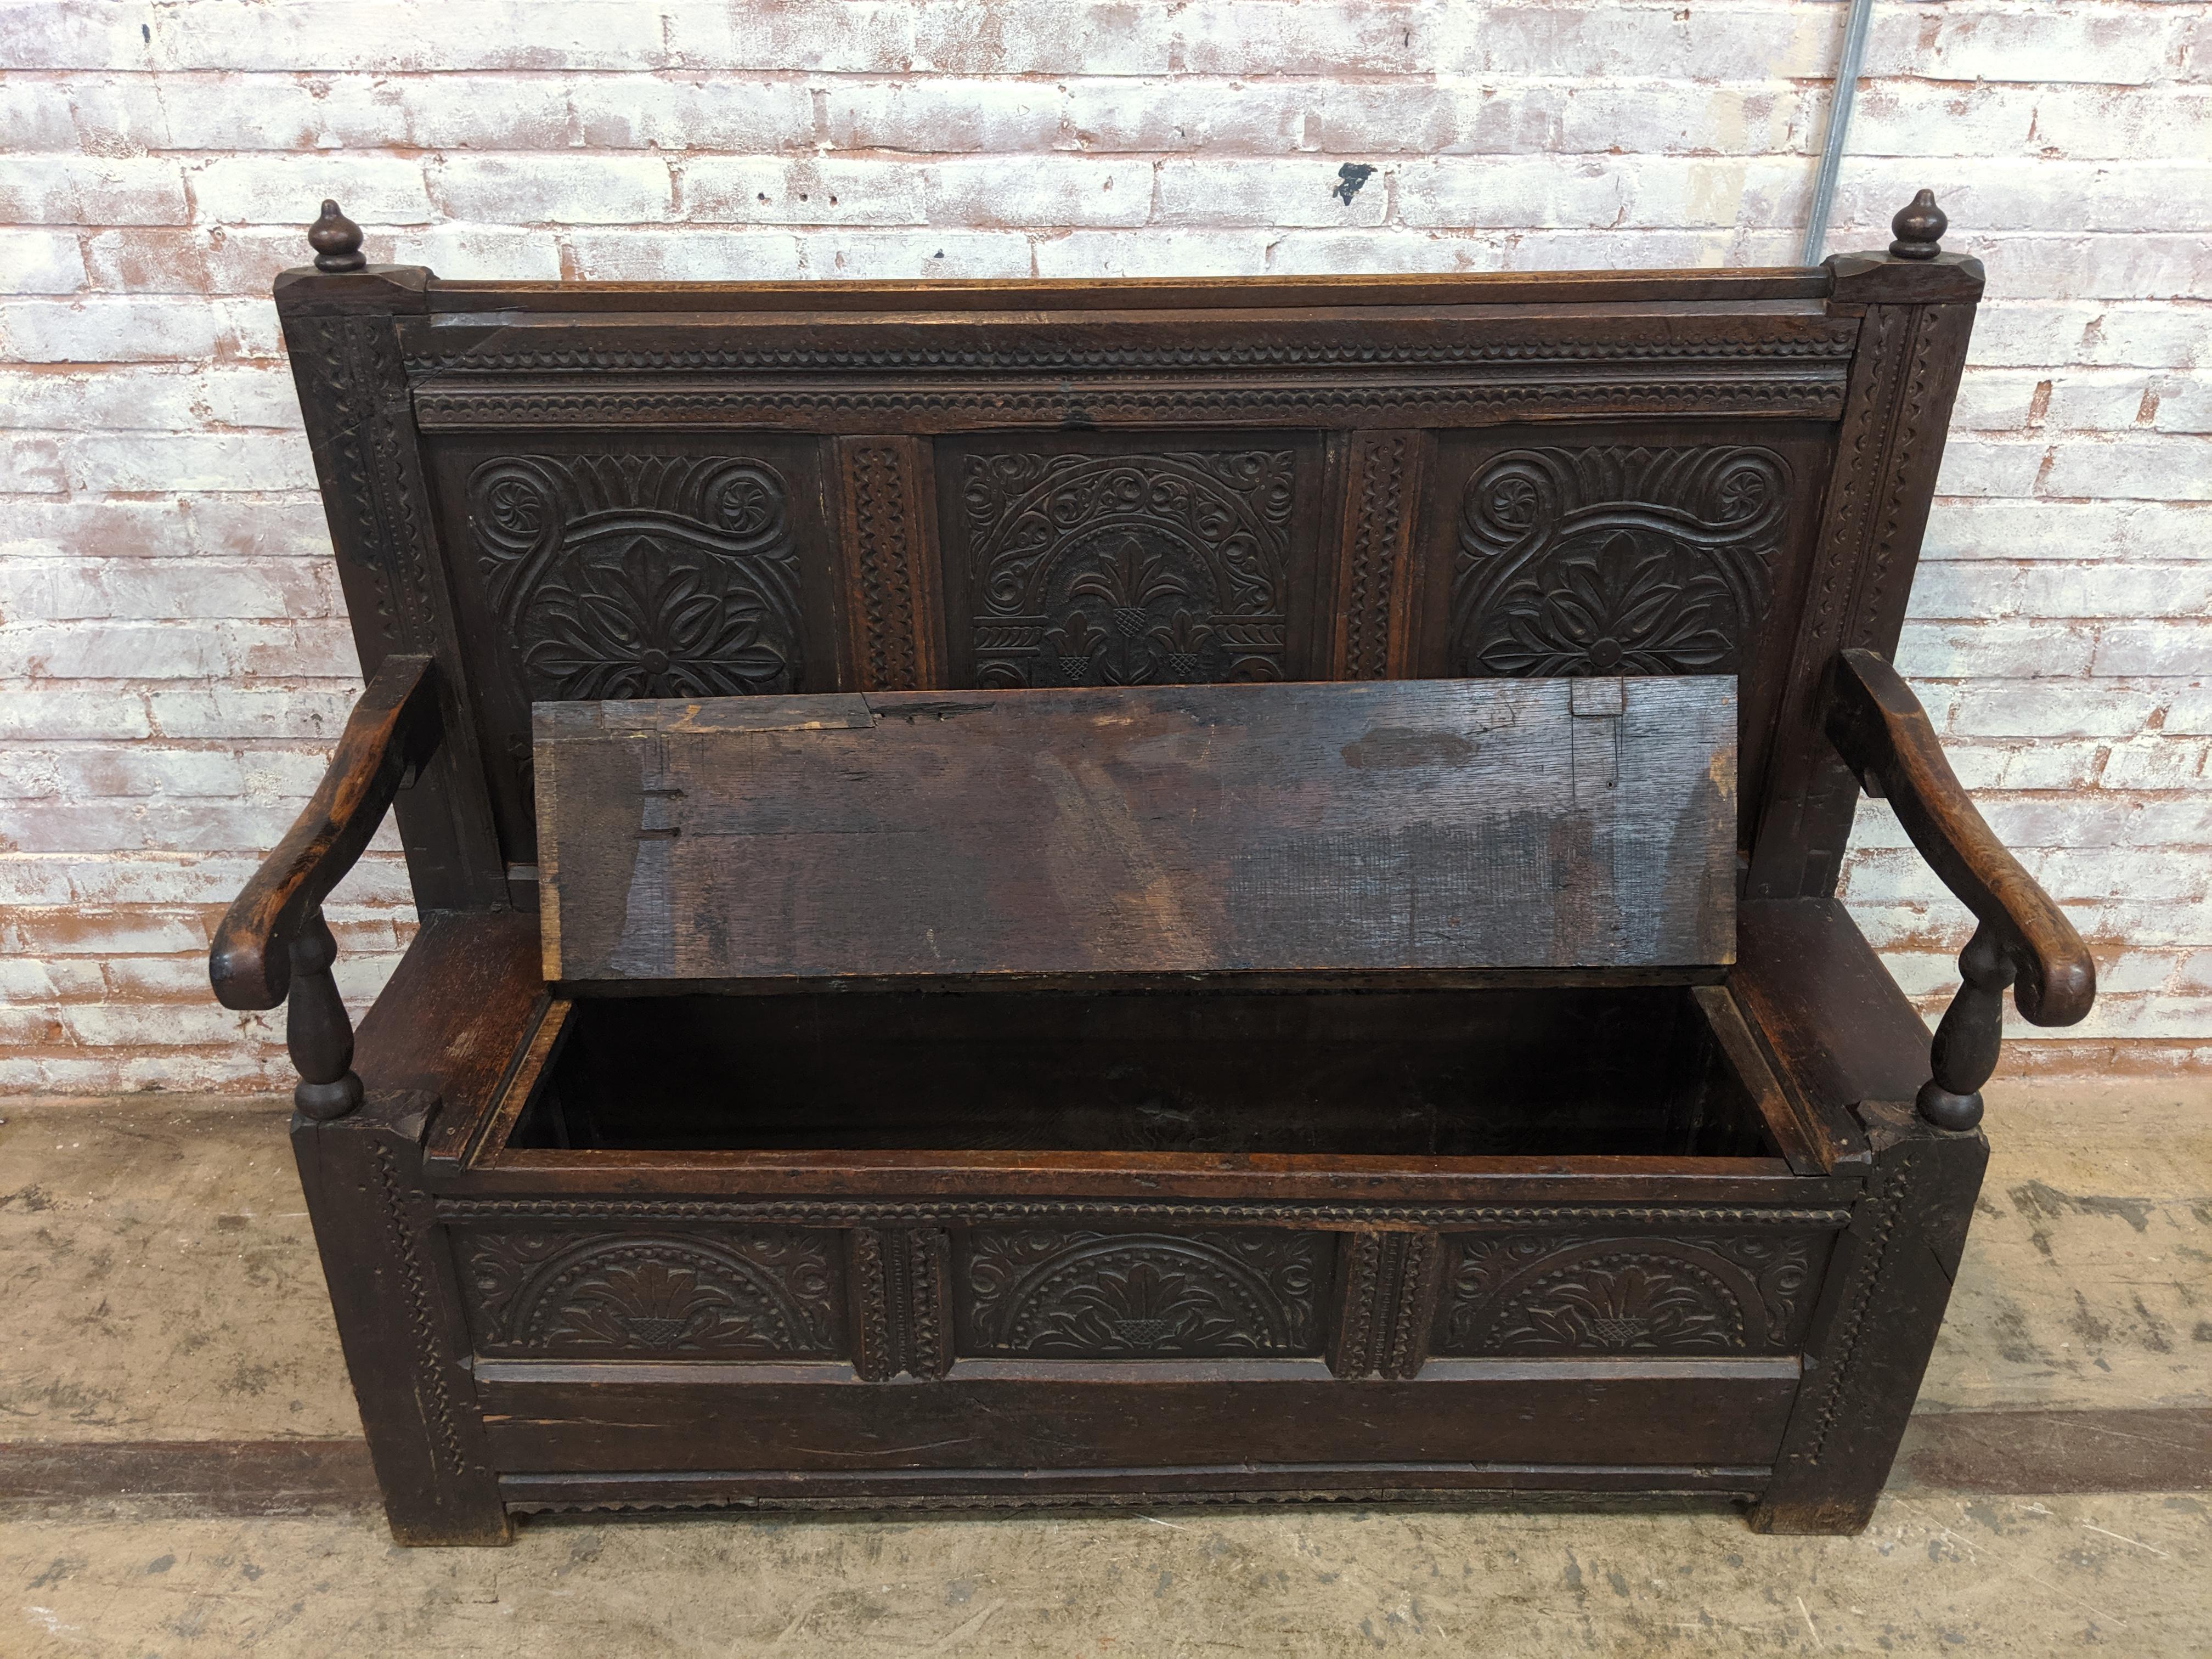 Beautiful 19th century Victorian carved oak English settle bench. Sometimes referred to as a monk's bench. It has wonderful carvings throughout and a storage area beneath the seat. Measures 53